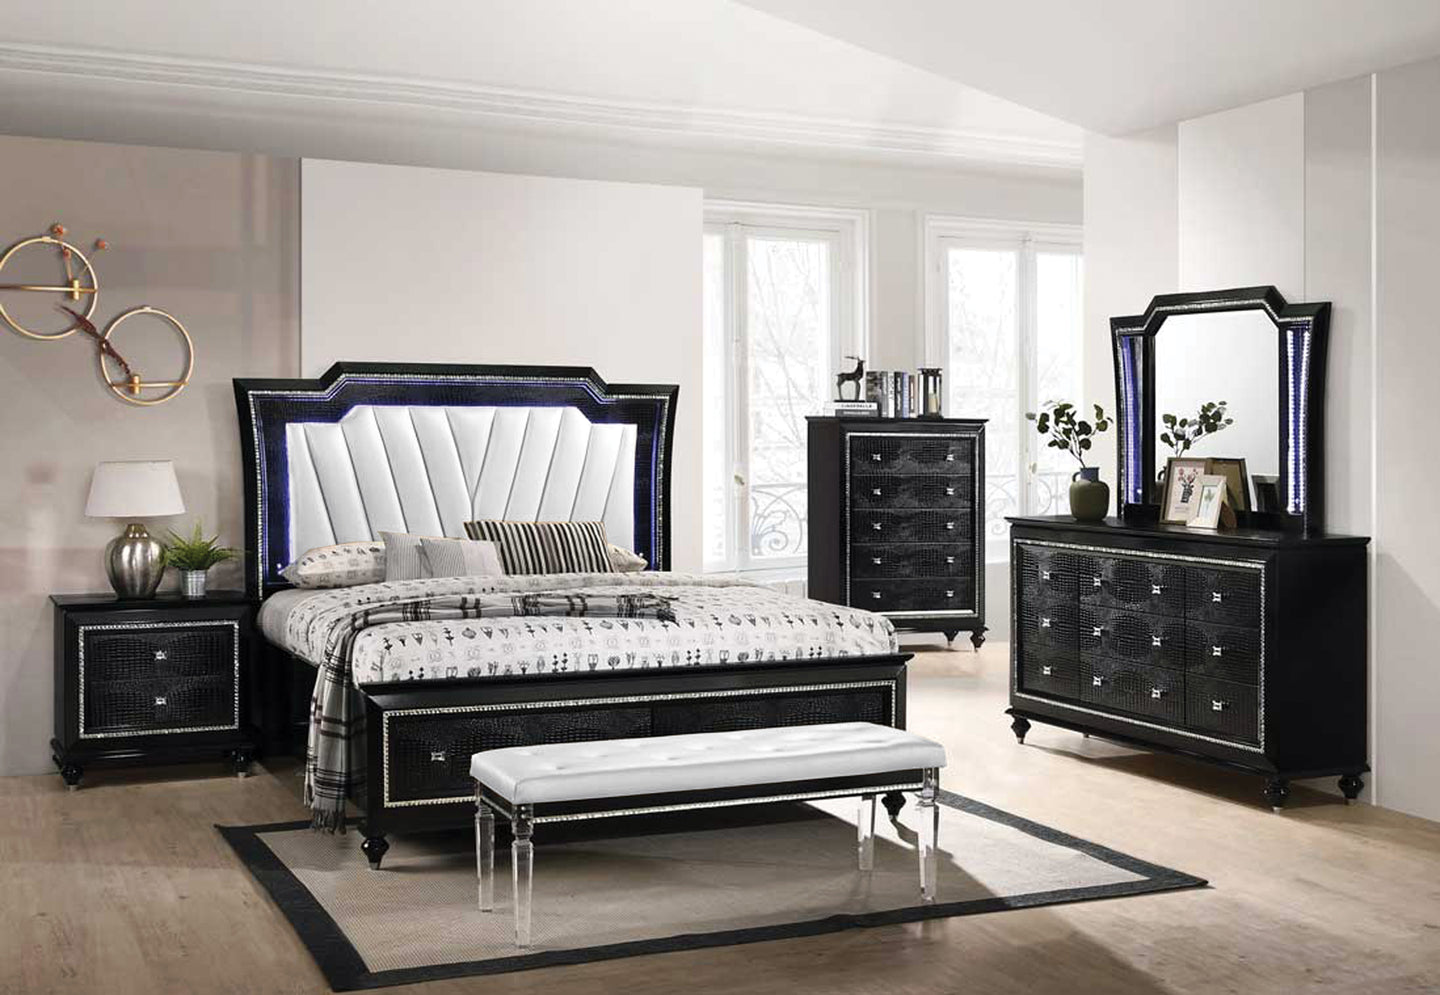 Modern Style Bedroom In Black With A White Pu Headboard